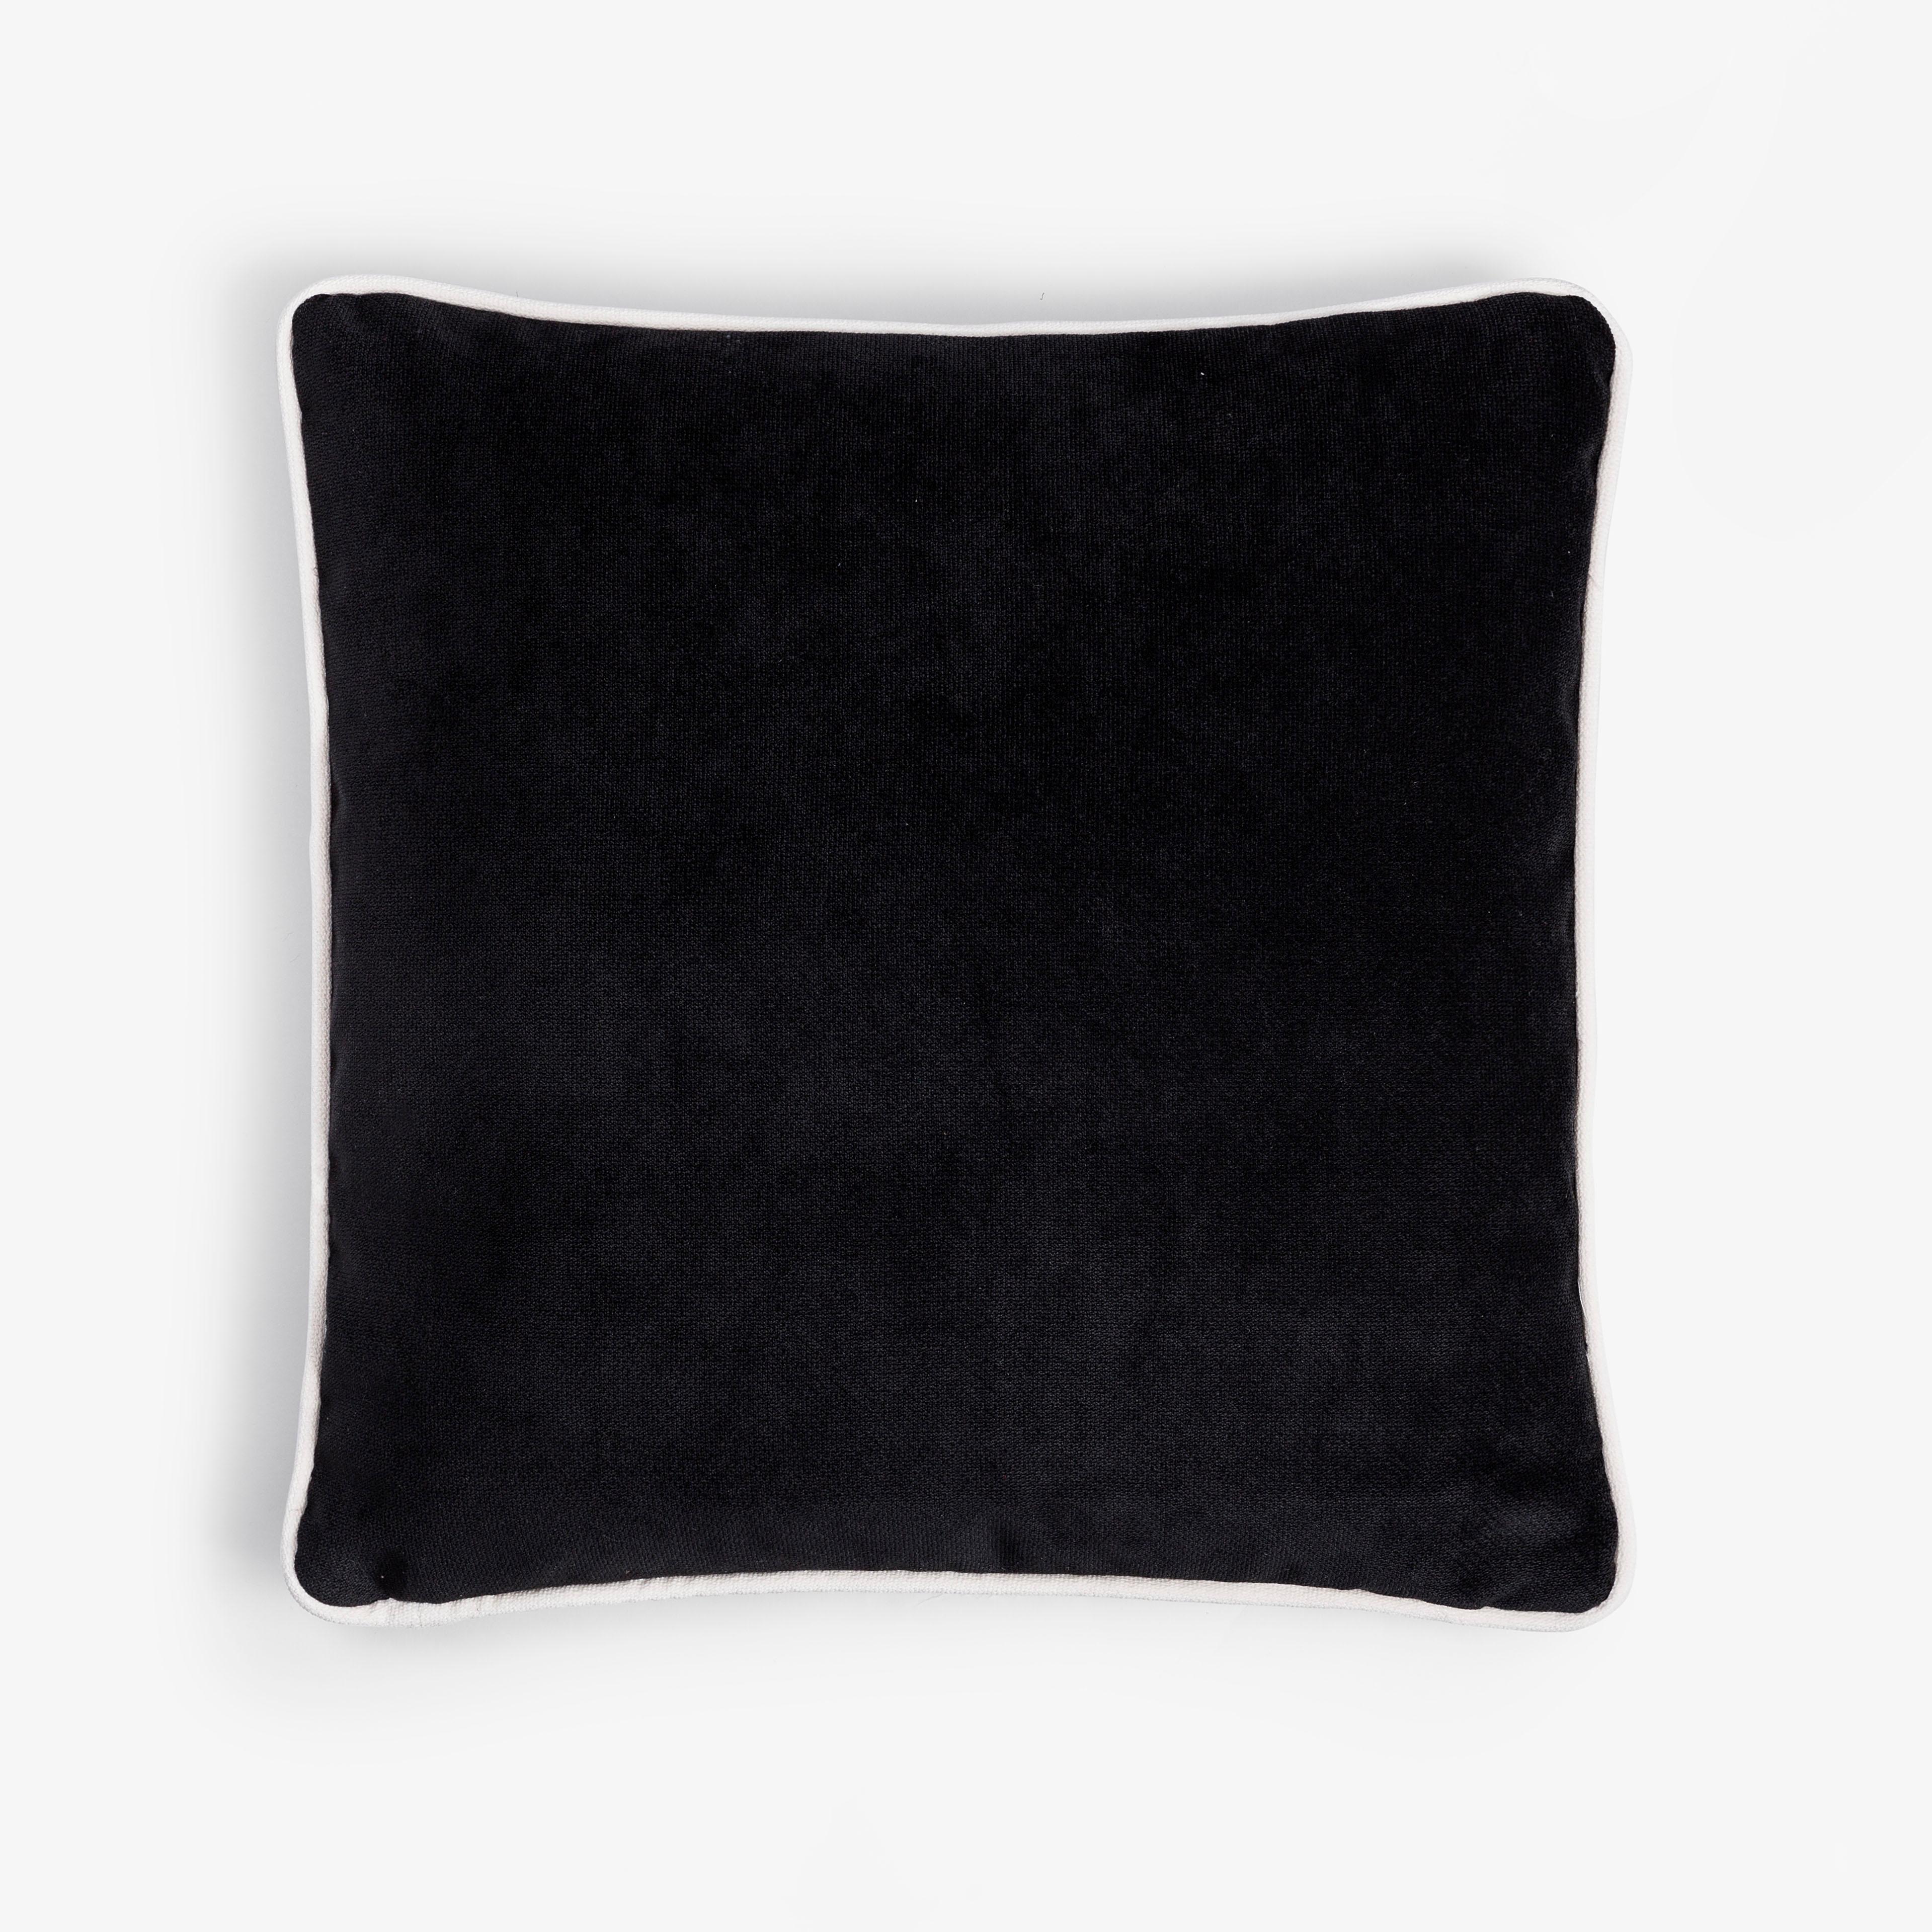 Hand-Crafted Happy Pillow Black Velvet with Black Fringes For Sale